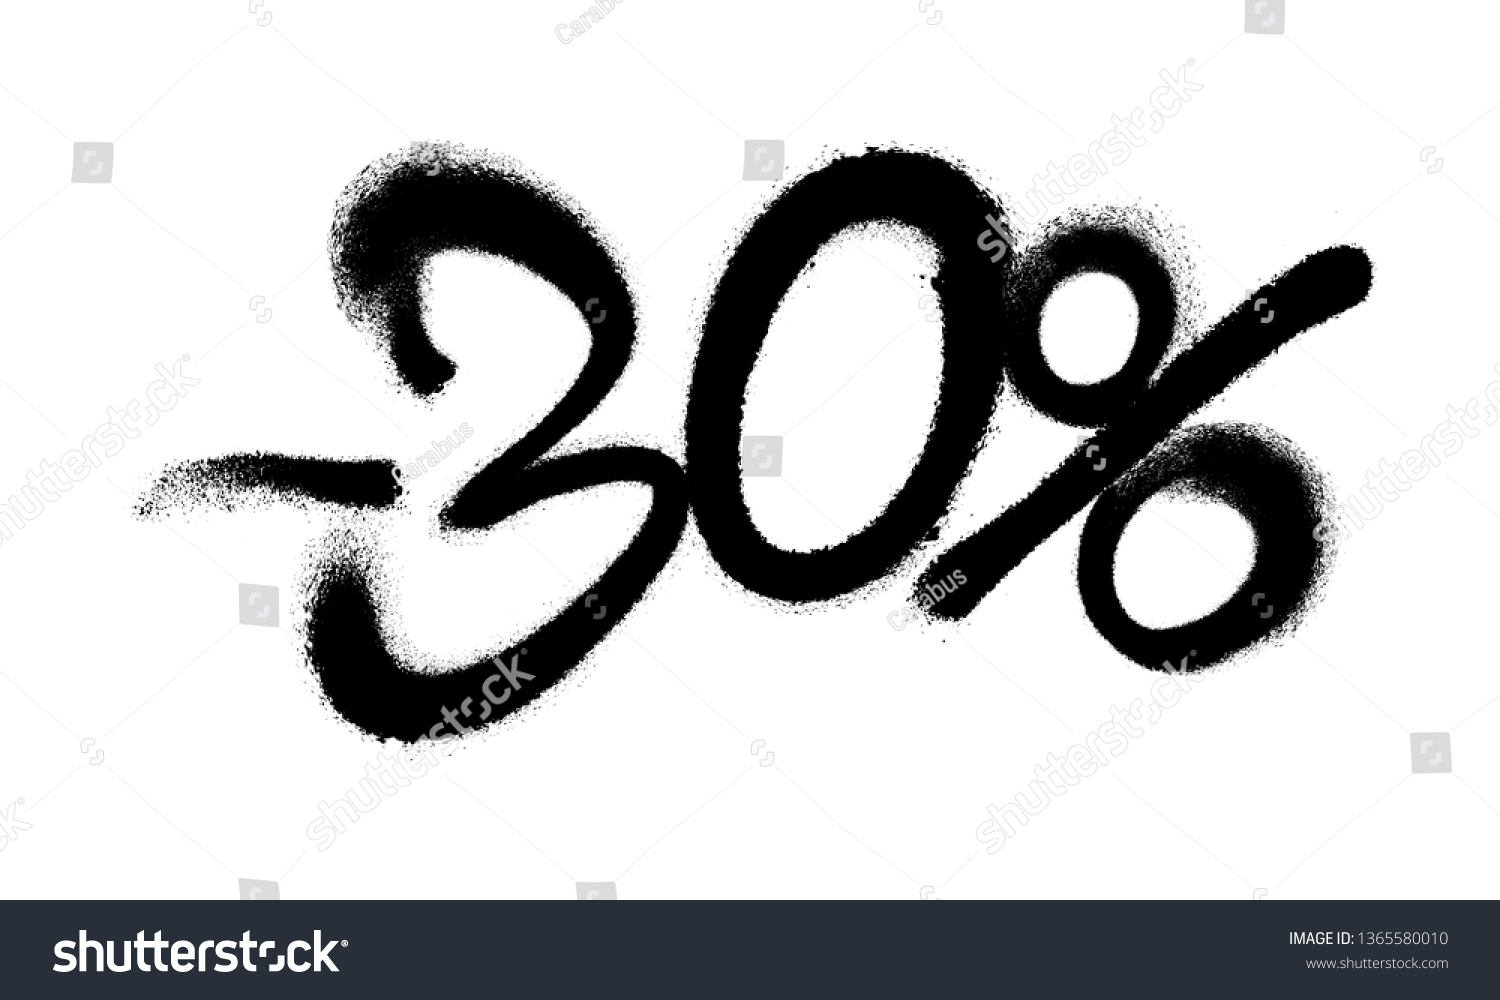 SVG of Sprayed -30 percent graffiti with overspray in black over white. Vector illustration. svg